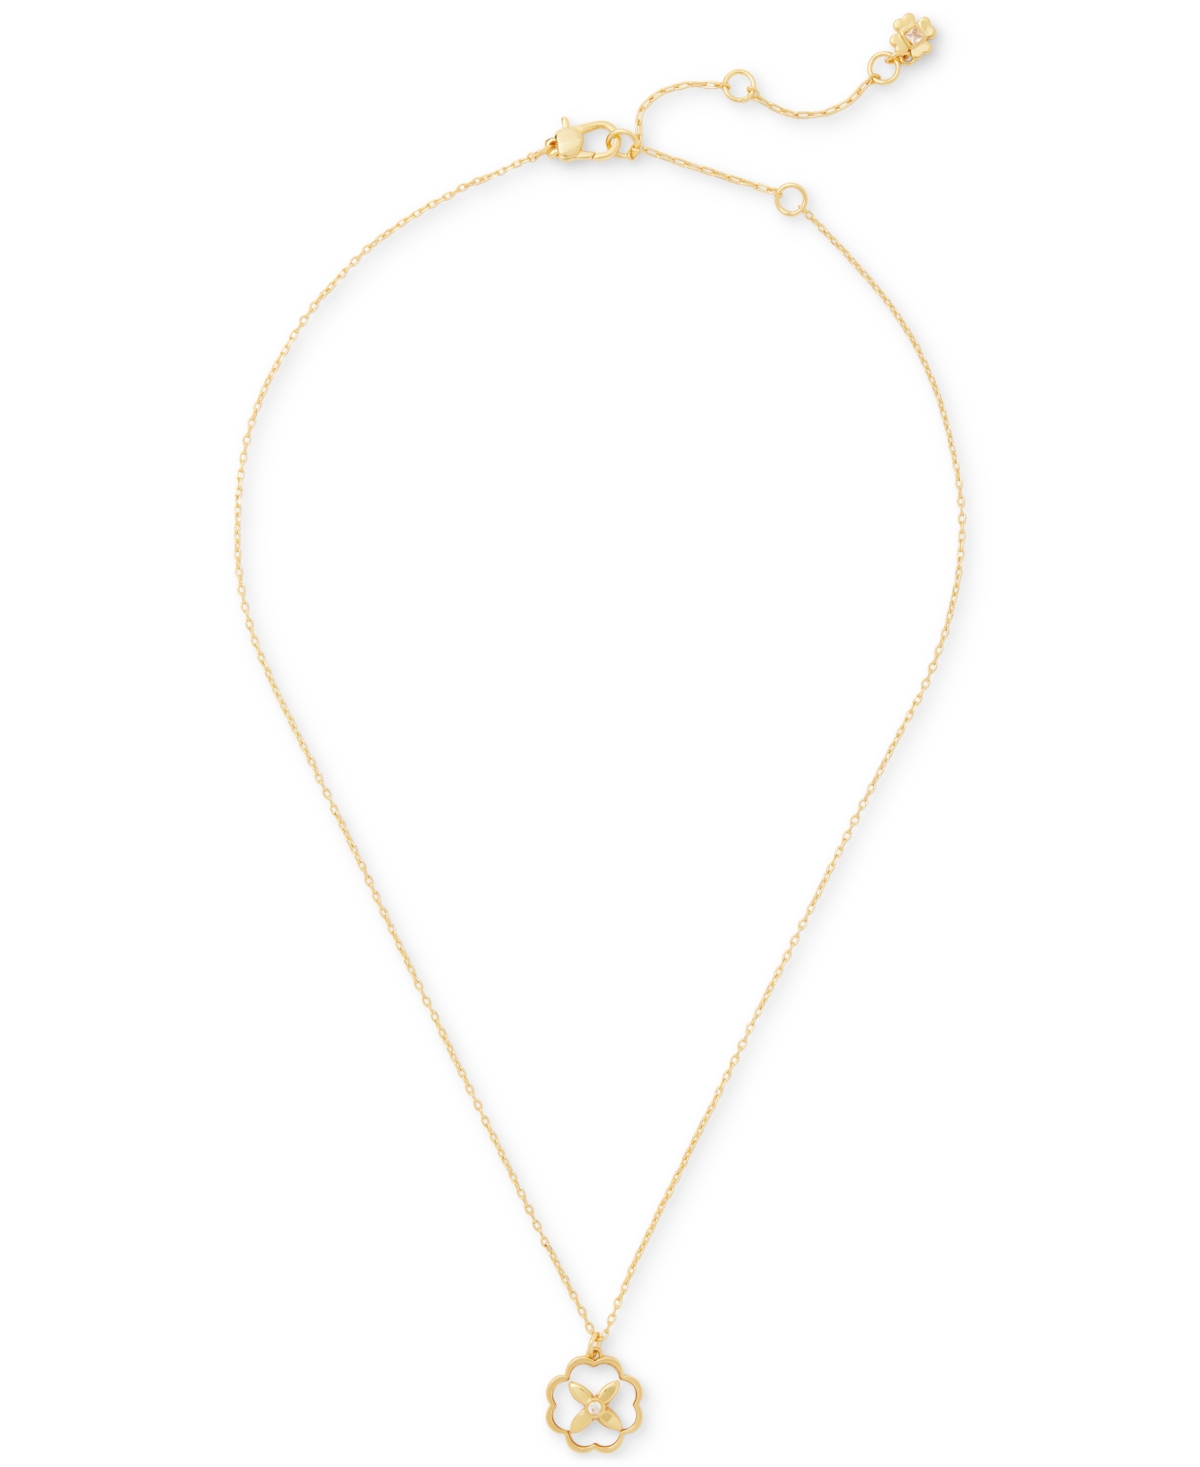 Gold-Tone Heritage Bloom Mother-of-Pearl Pendant Necklace, 16" + 3" extender - Cream/gold